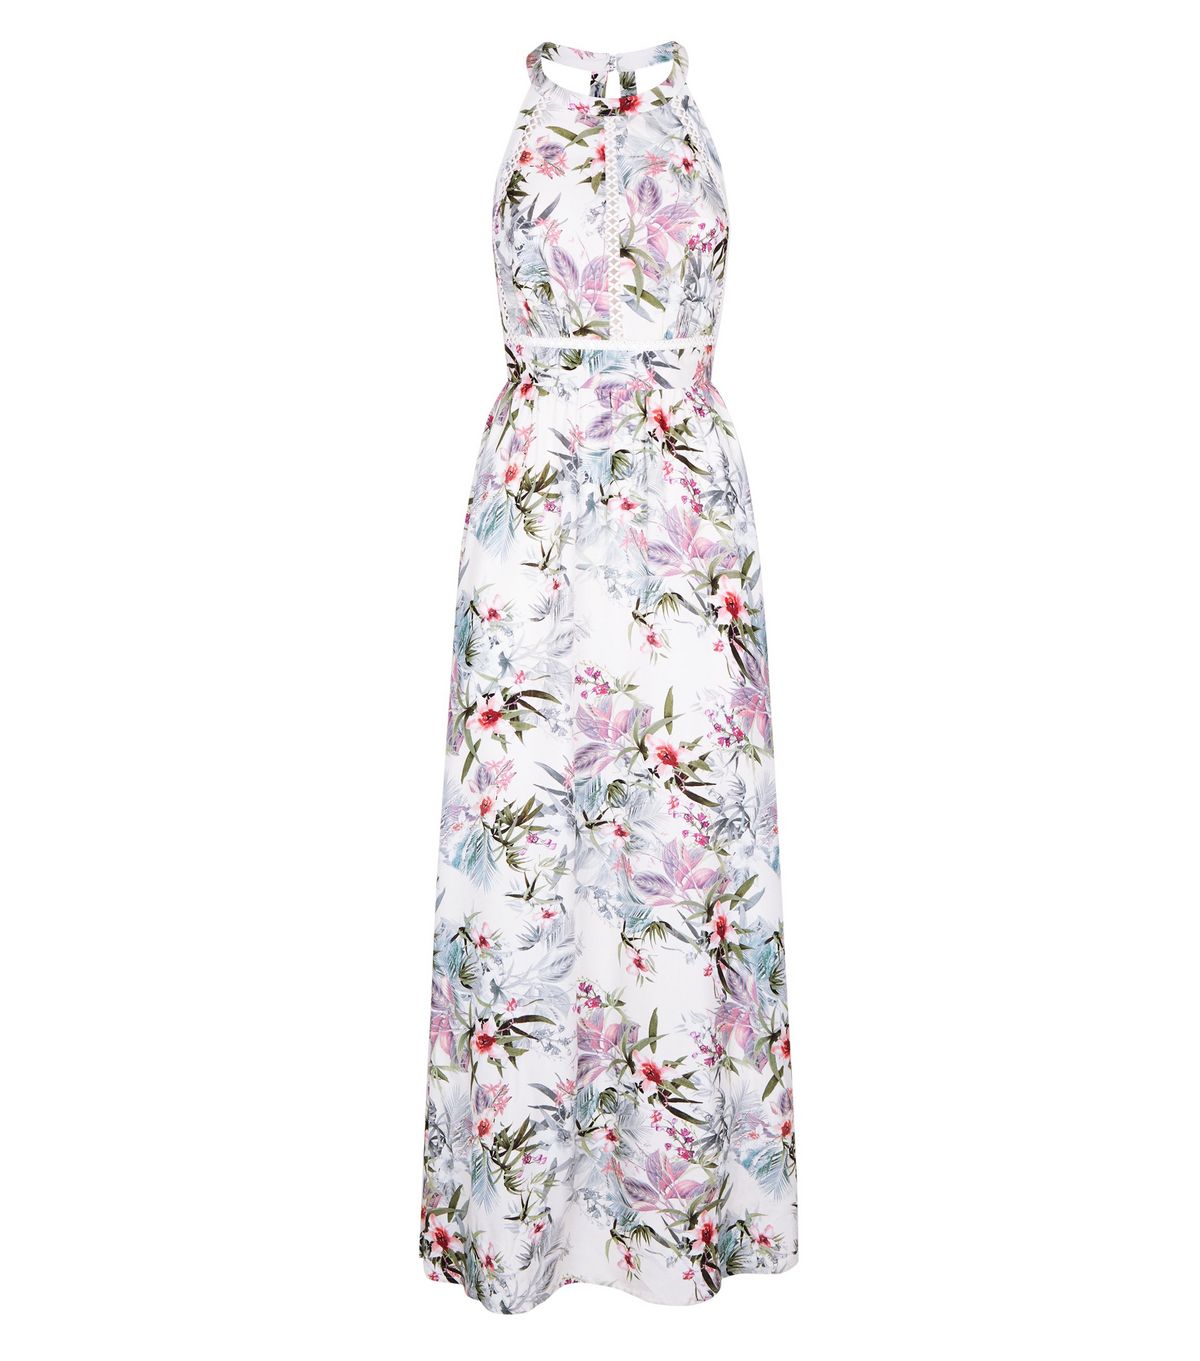 12 Long Floral Dresses To Wear This Summer - Society19 UK